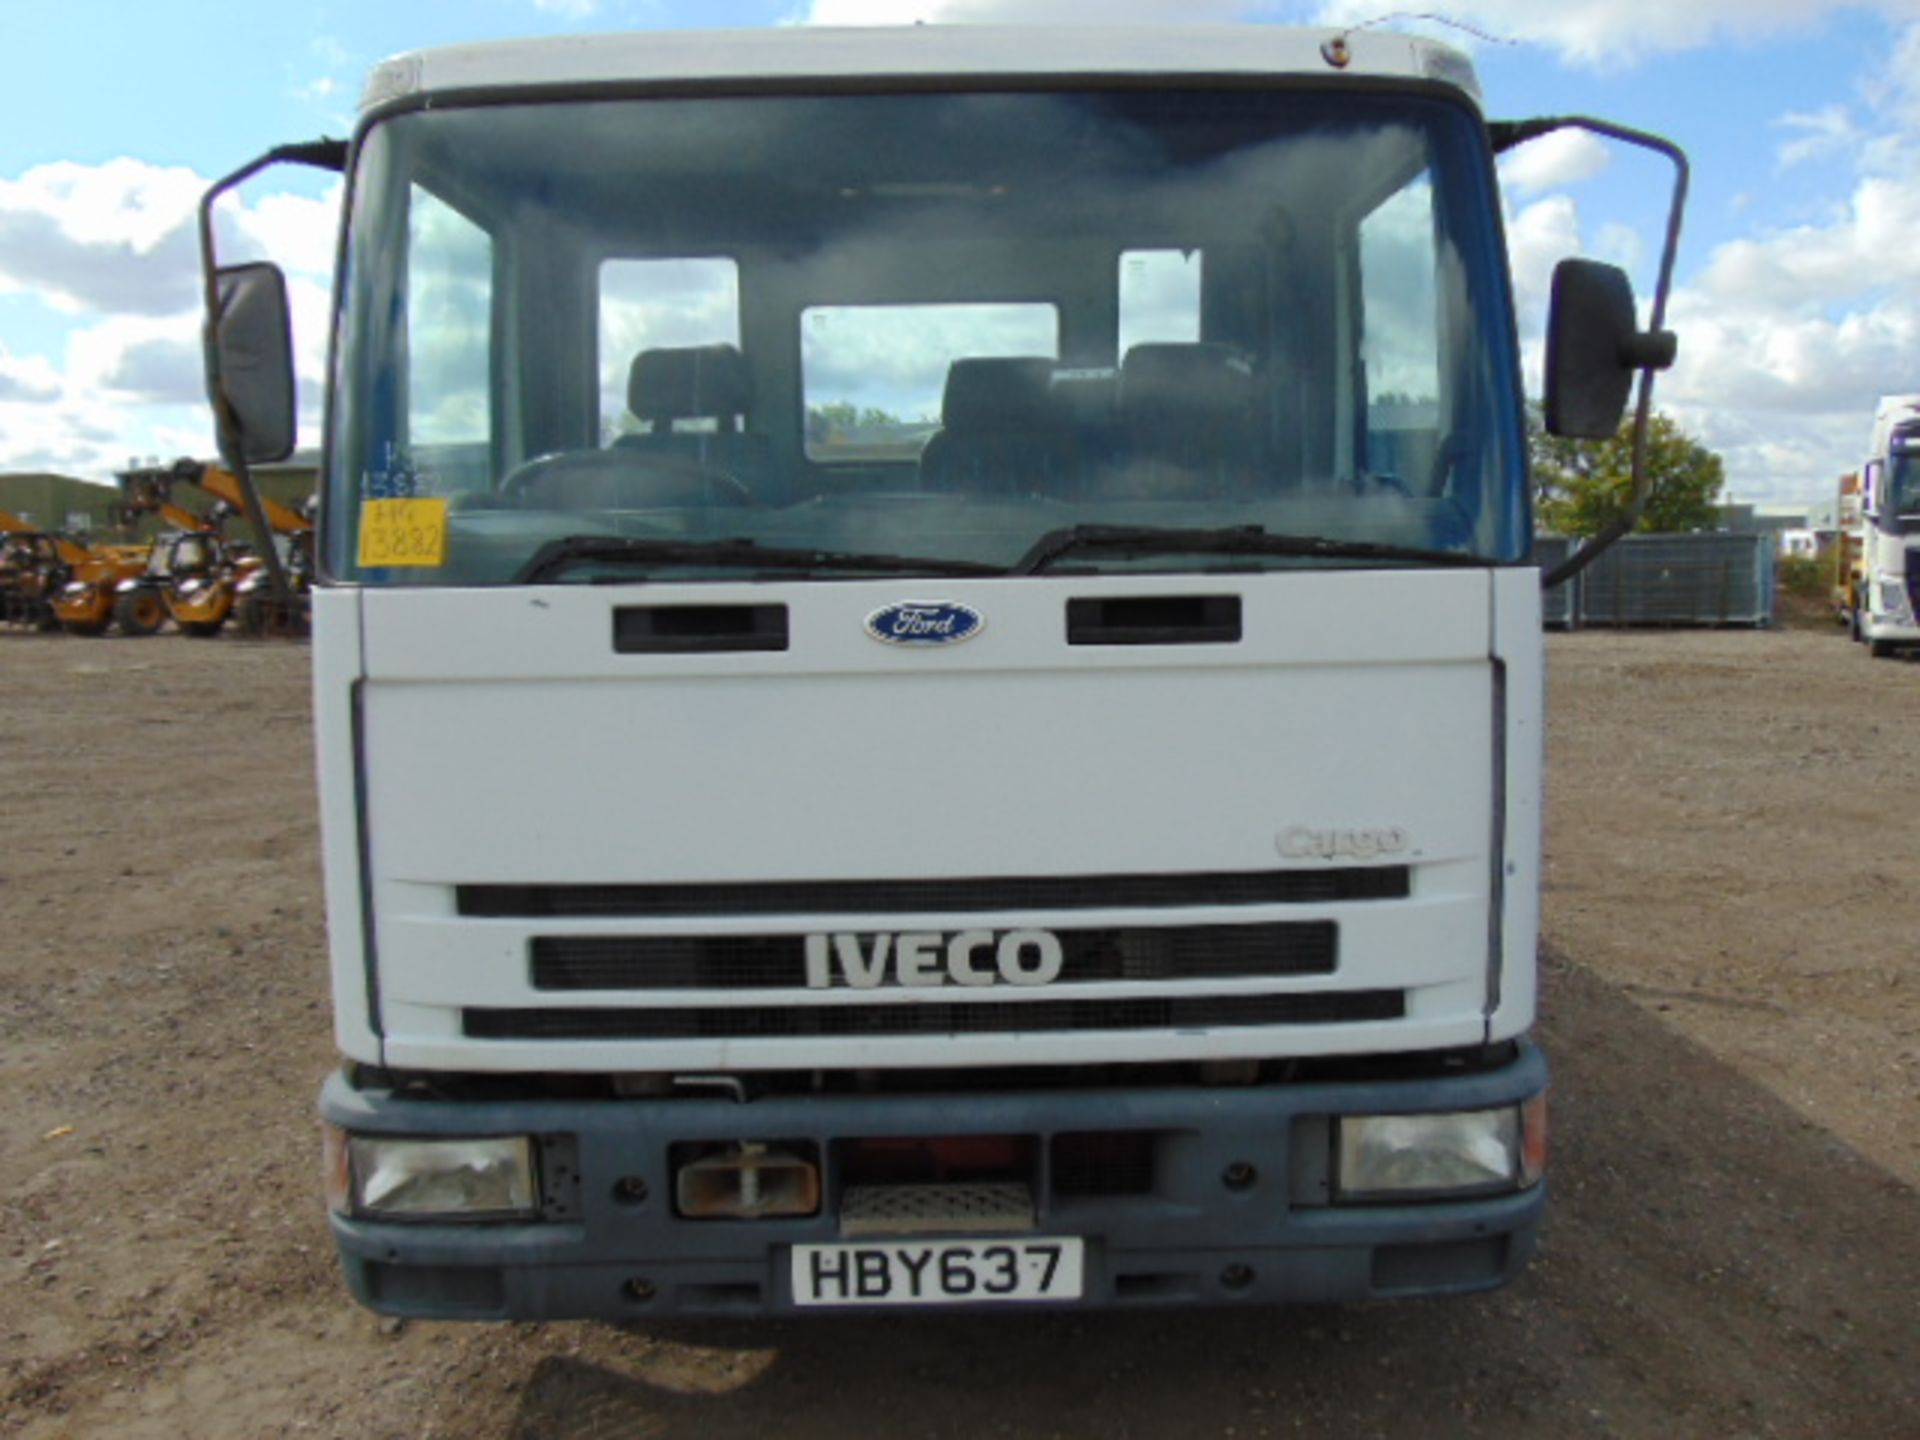 Ford Iveco Cargo 75E14 Complete with Rear Tail Lift - Image 2 of 22